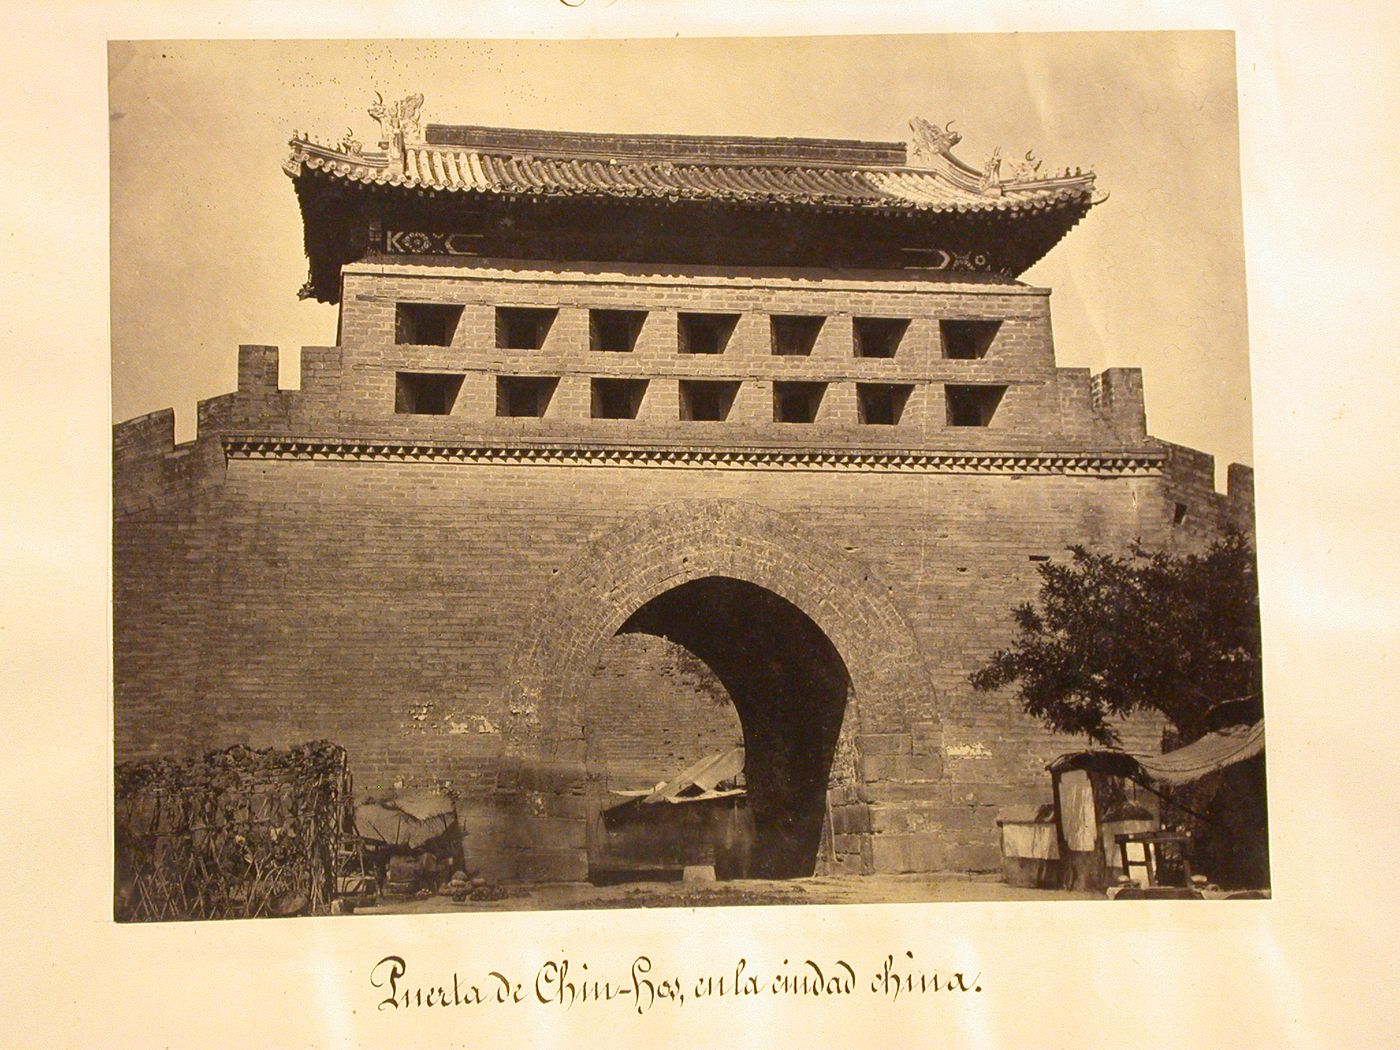 View of the Gate of Eternal Stability [Yongding Men] or the Right Gate of Peace [You'an Men], Peking (now Beijing), China